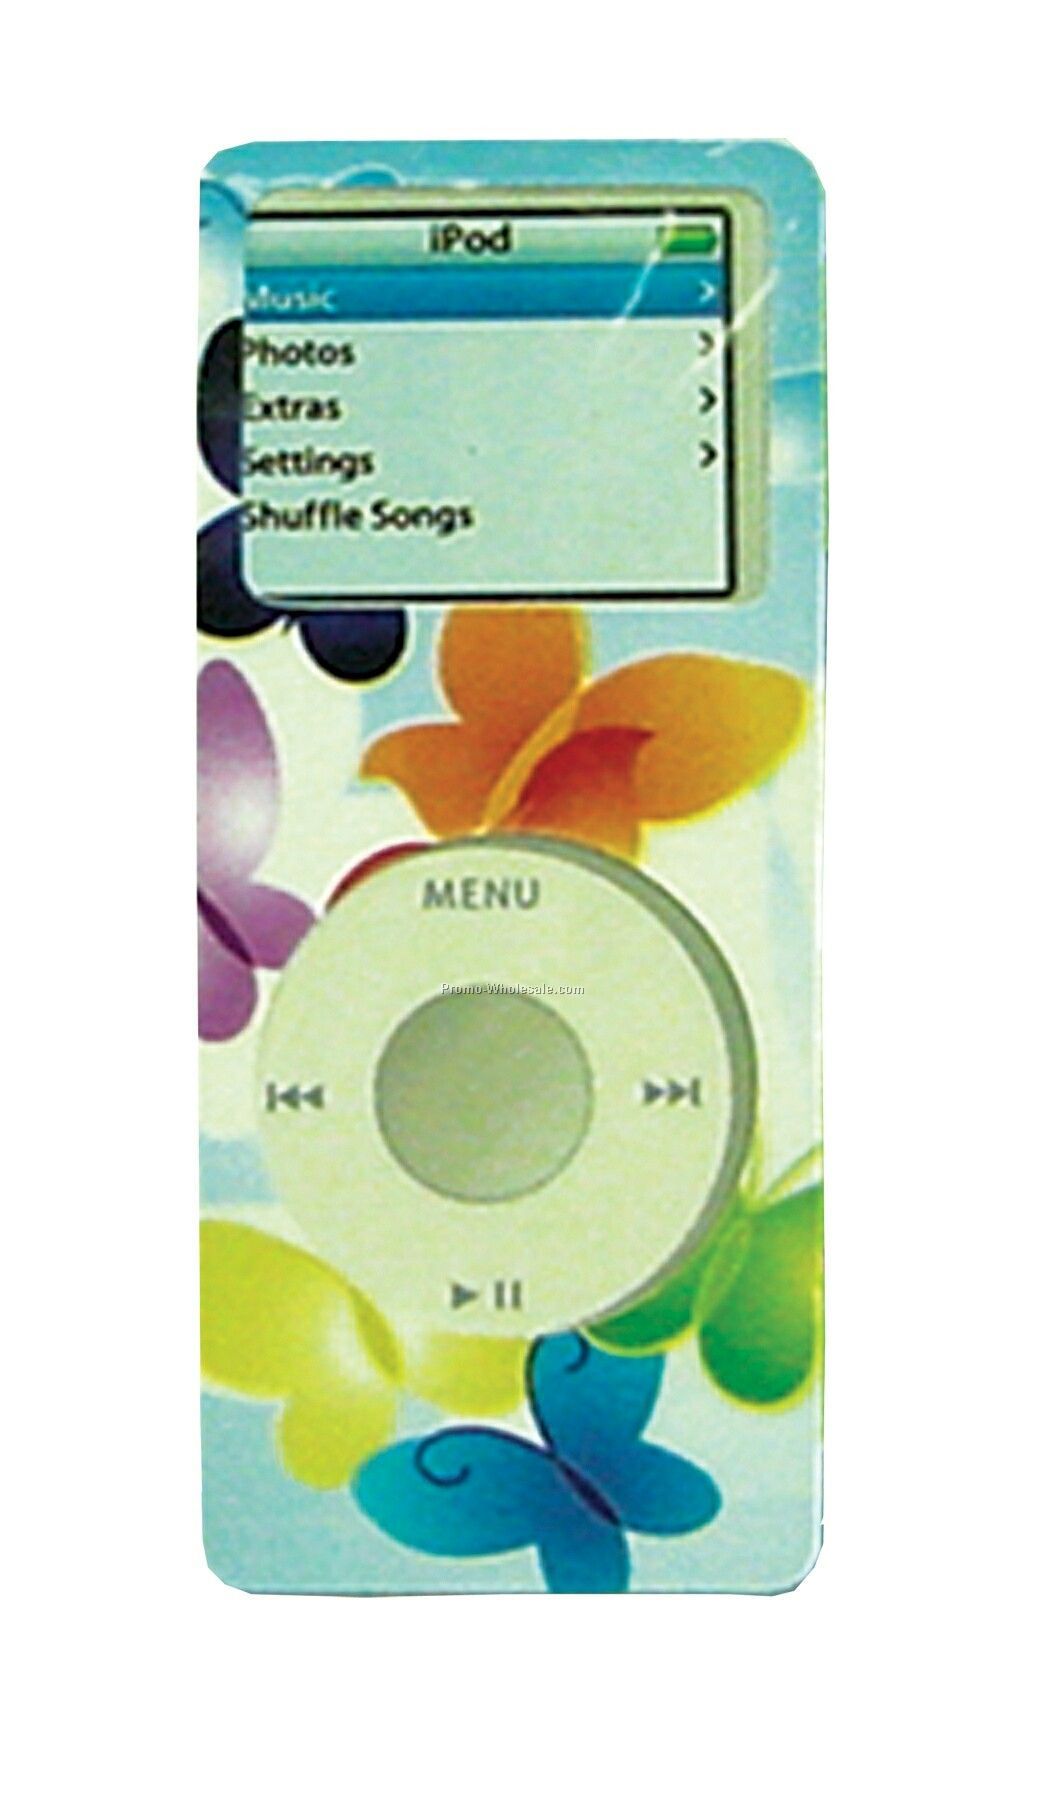 Protector Skins For Ipod Slims